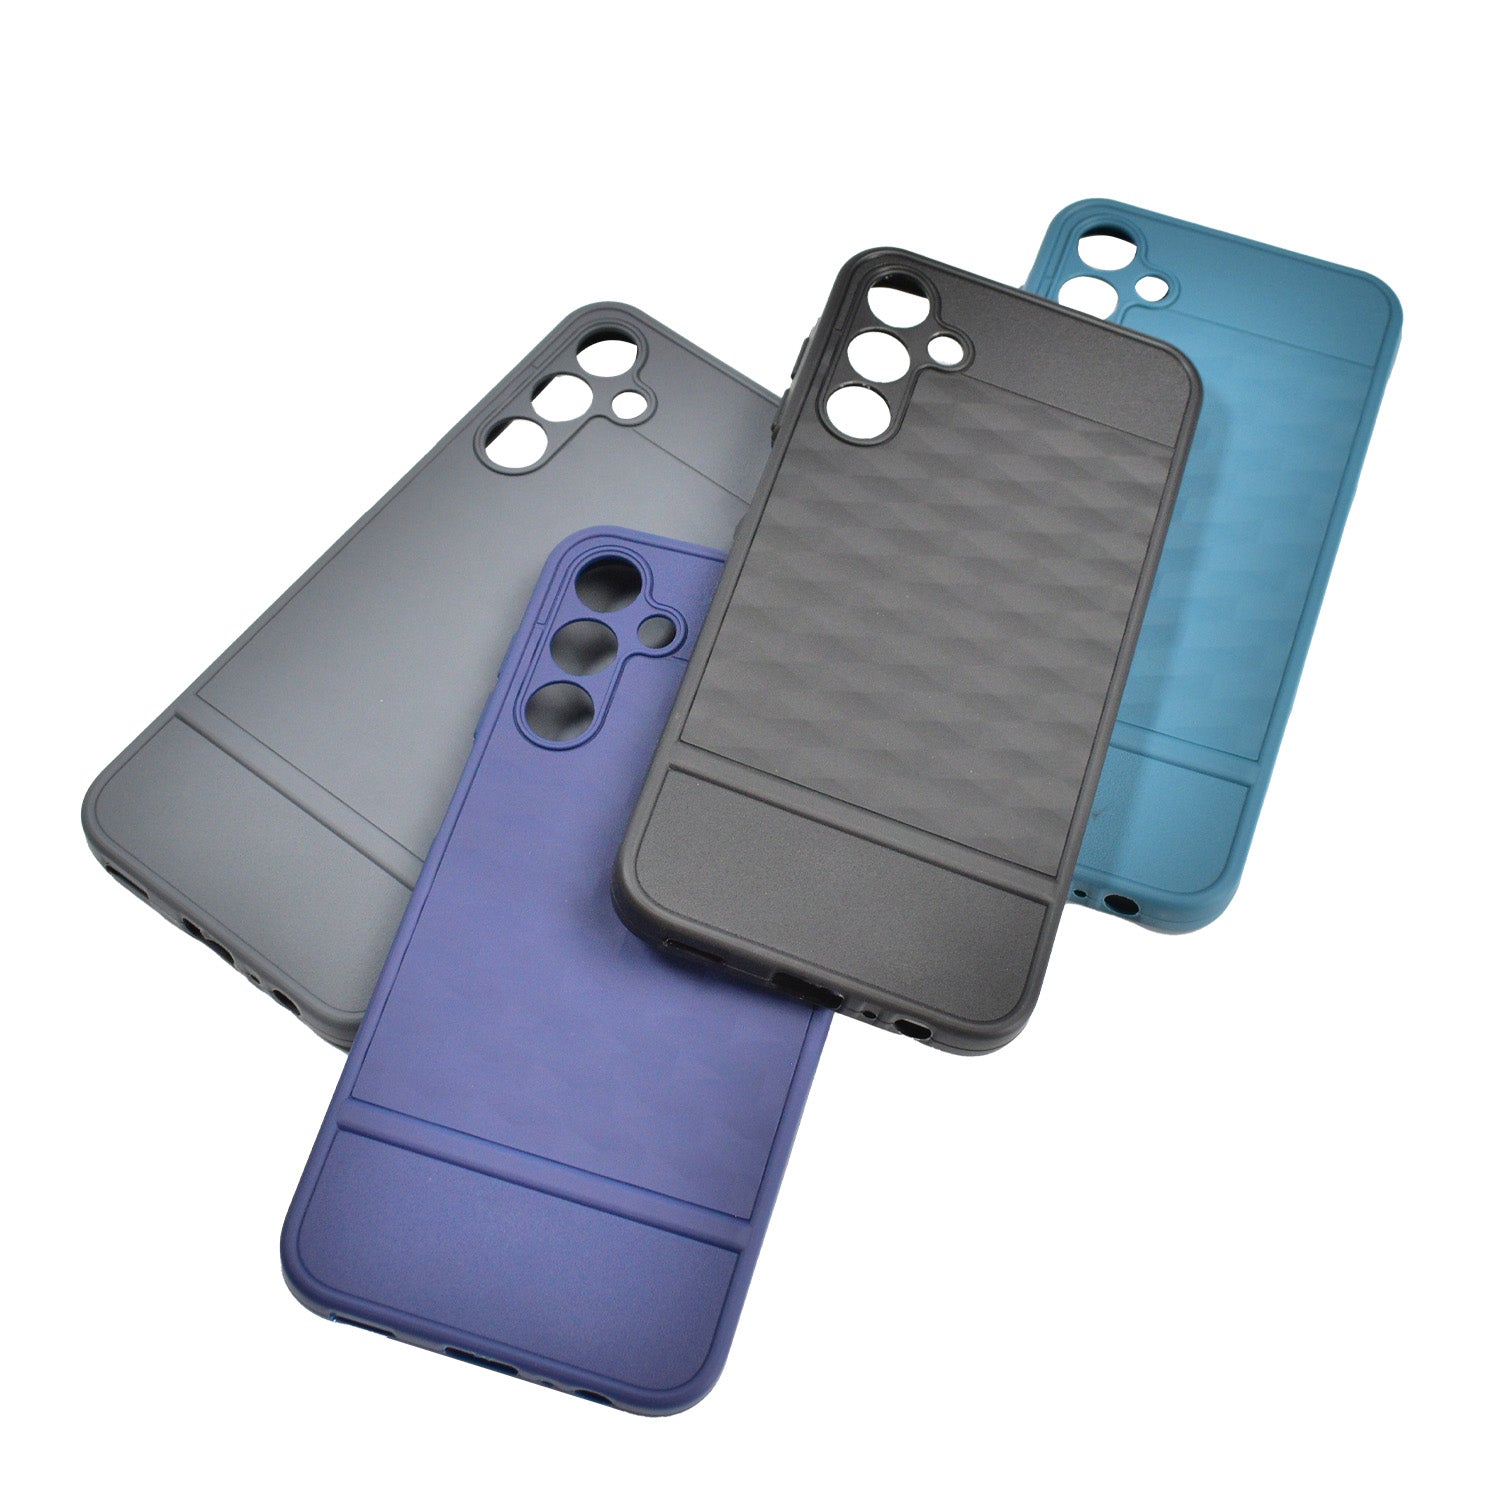 Diamond Textured Soft Silicone Case For Samsung